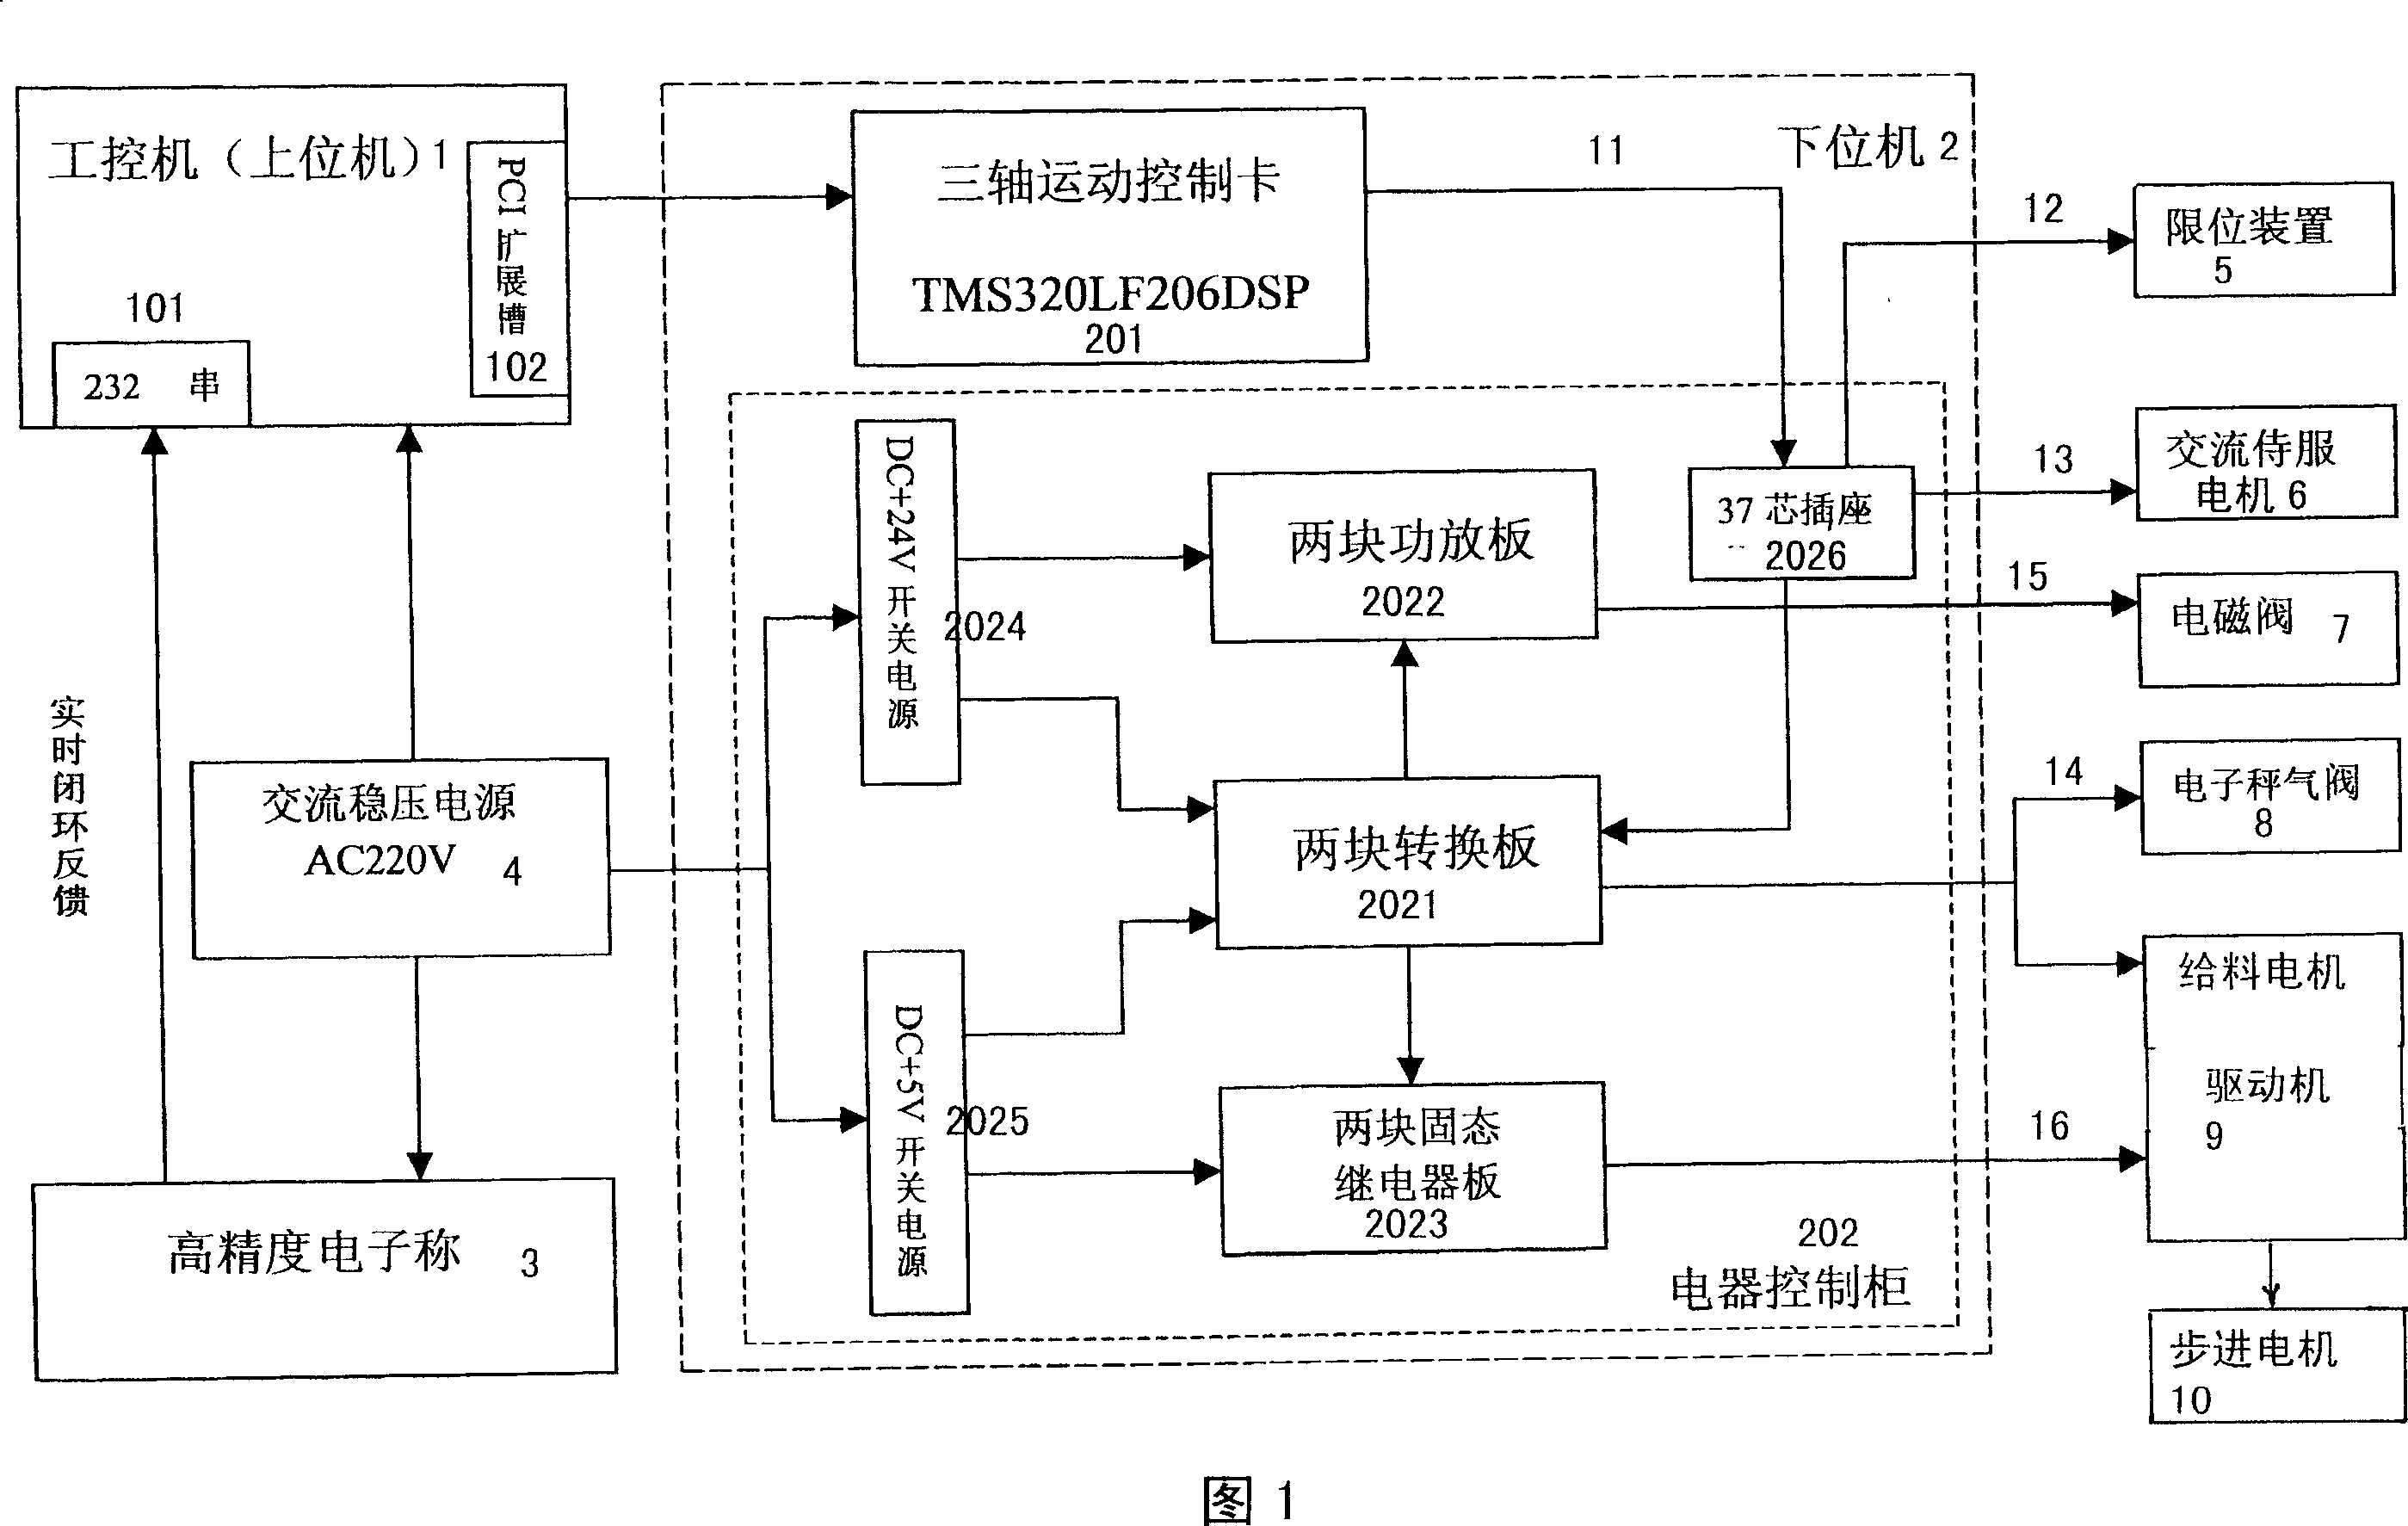 Circuit system for automatic material weighing and blending production line control